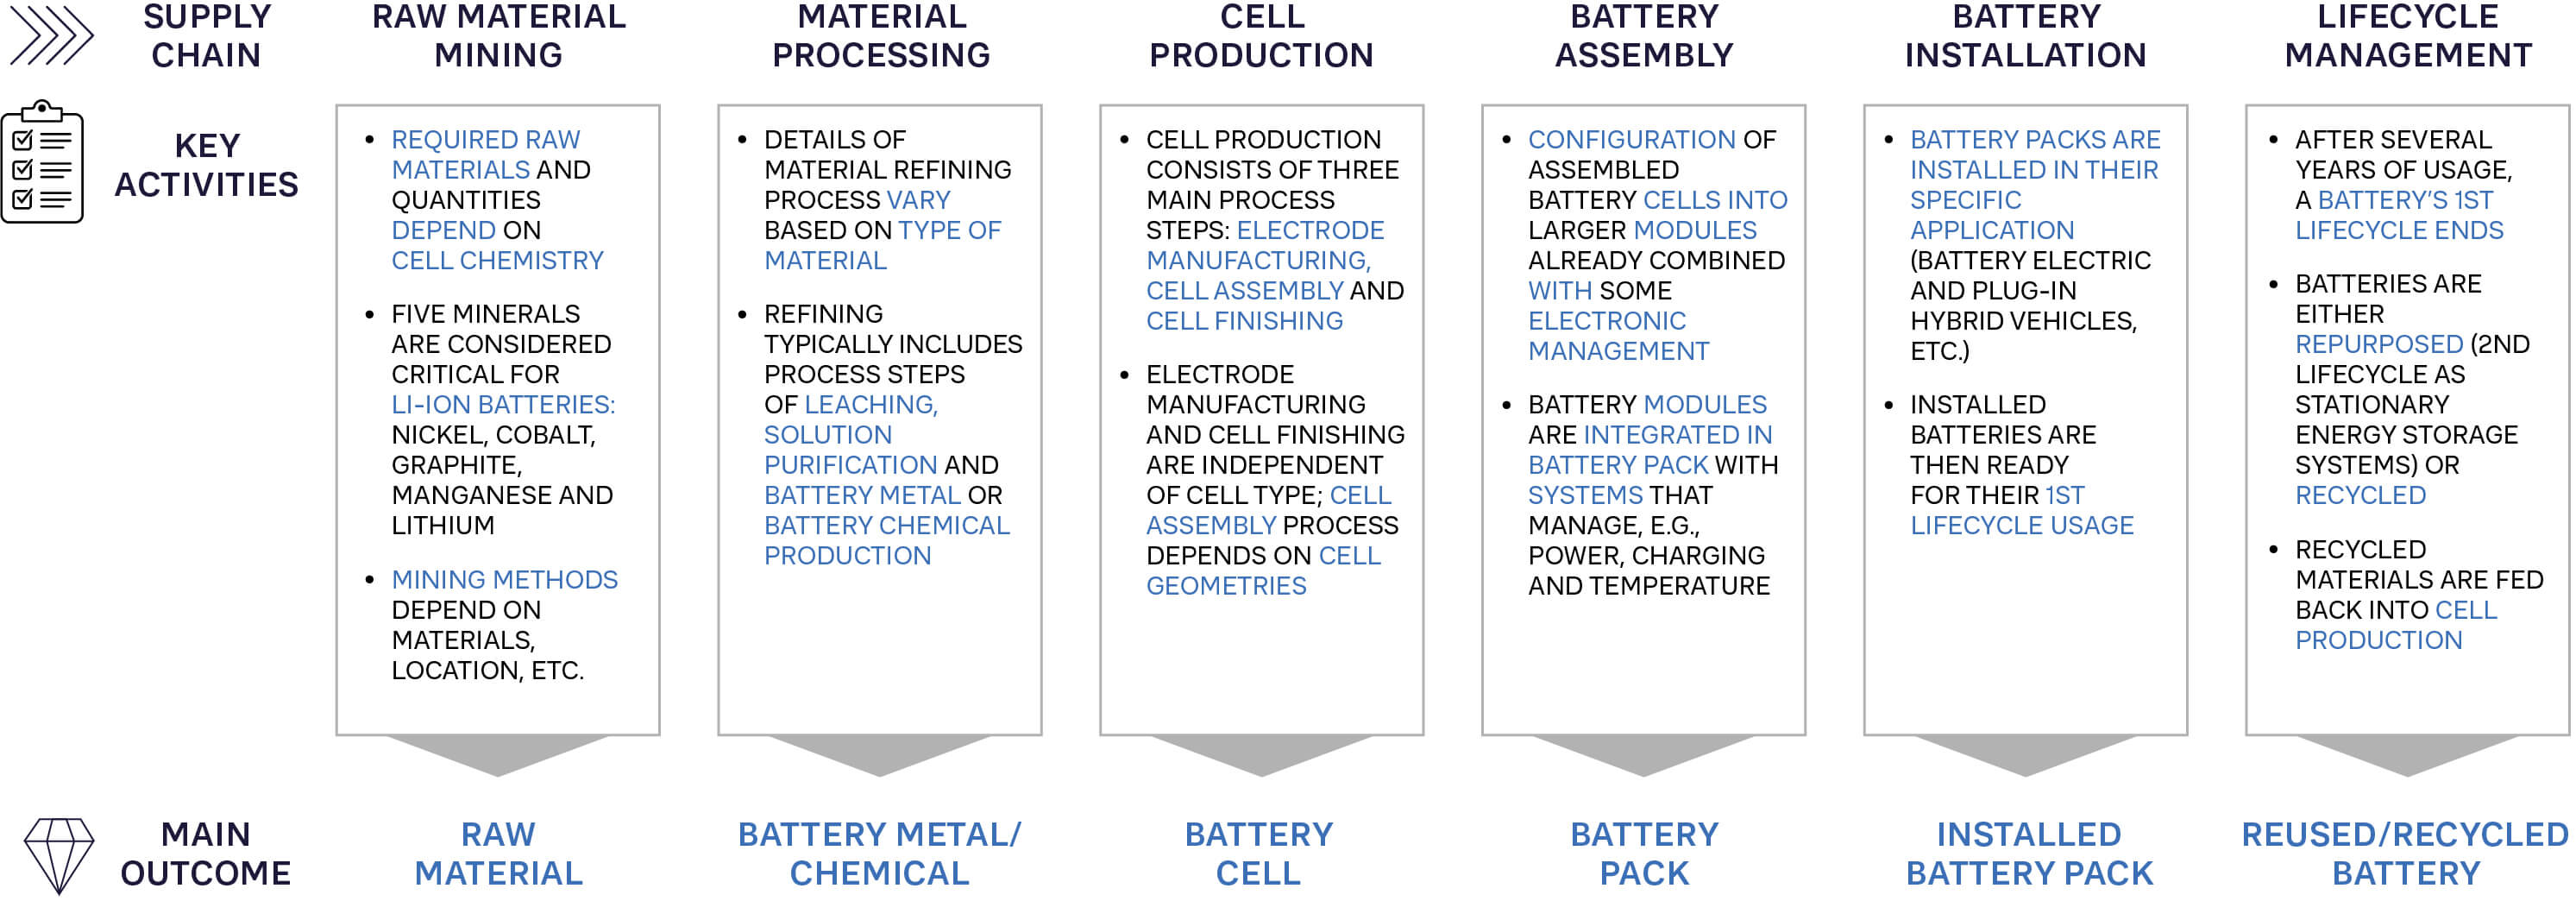 FIGURE 1: THE END-TO-END BATTERY SUPPLY CHAIN